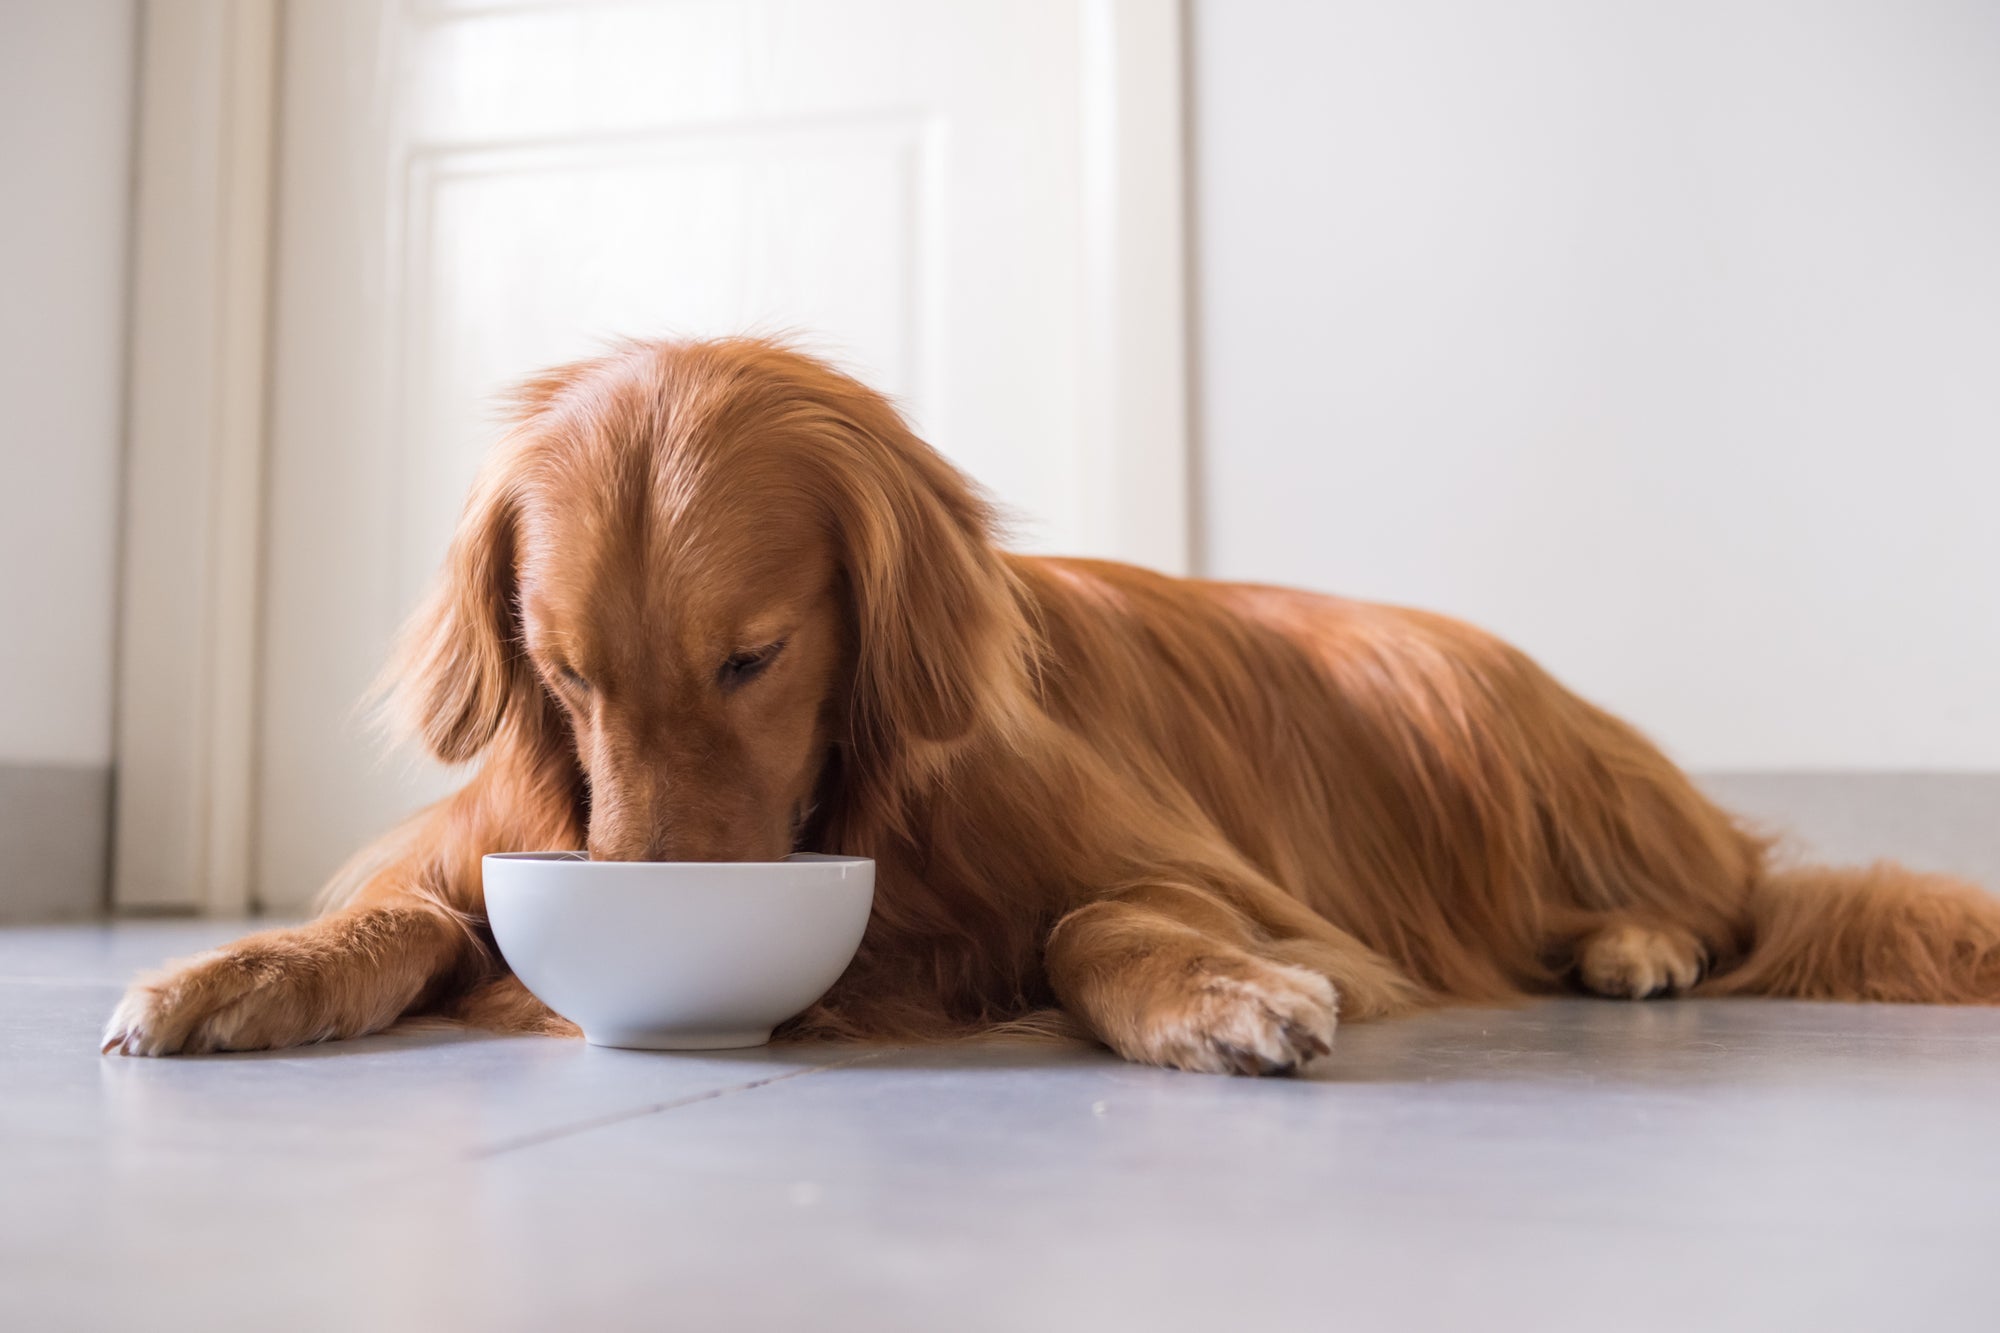 Things to Think About If You Feed Your Dog From a Plastic Bowl